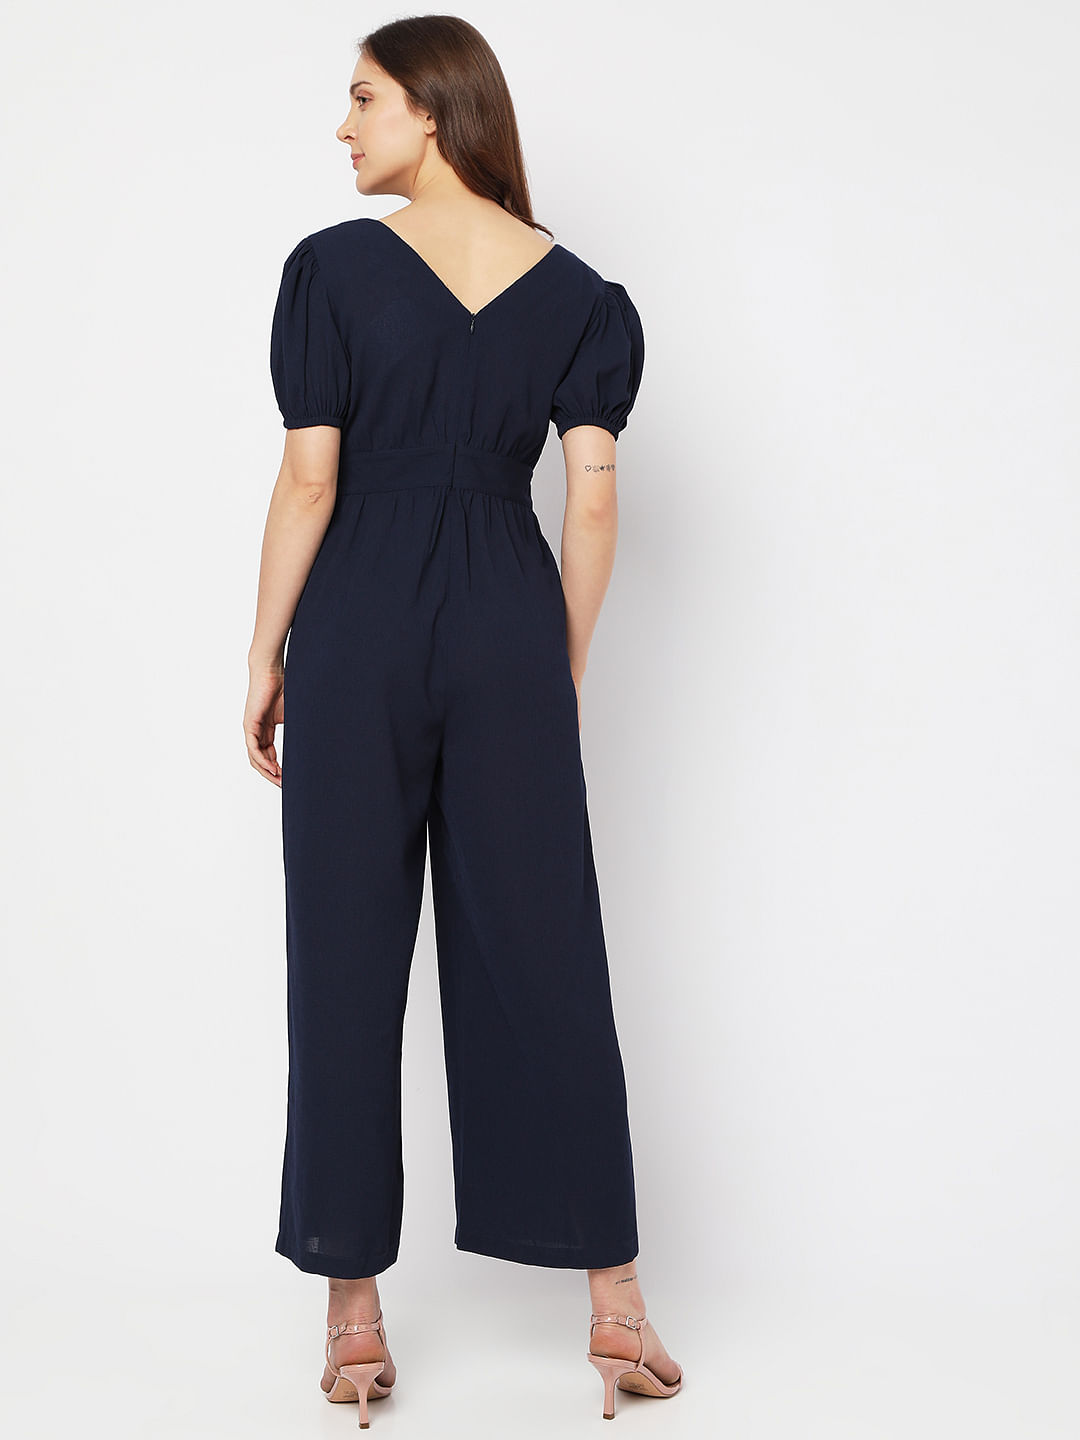 The Dry State Women Dark Blue Coloured Solid Jumpsuit